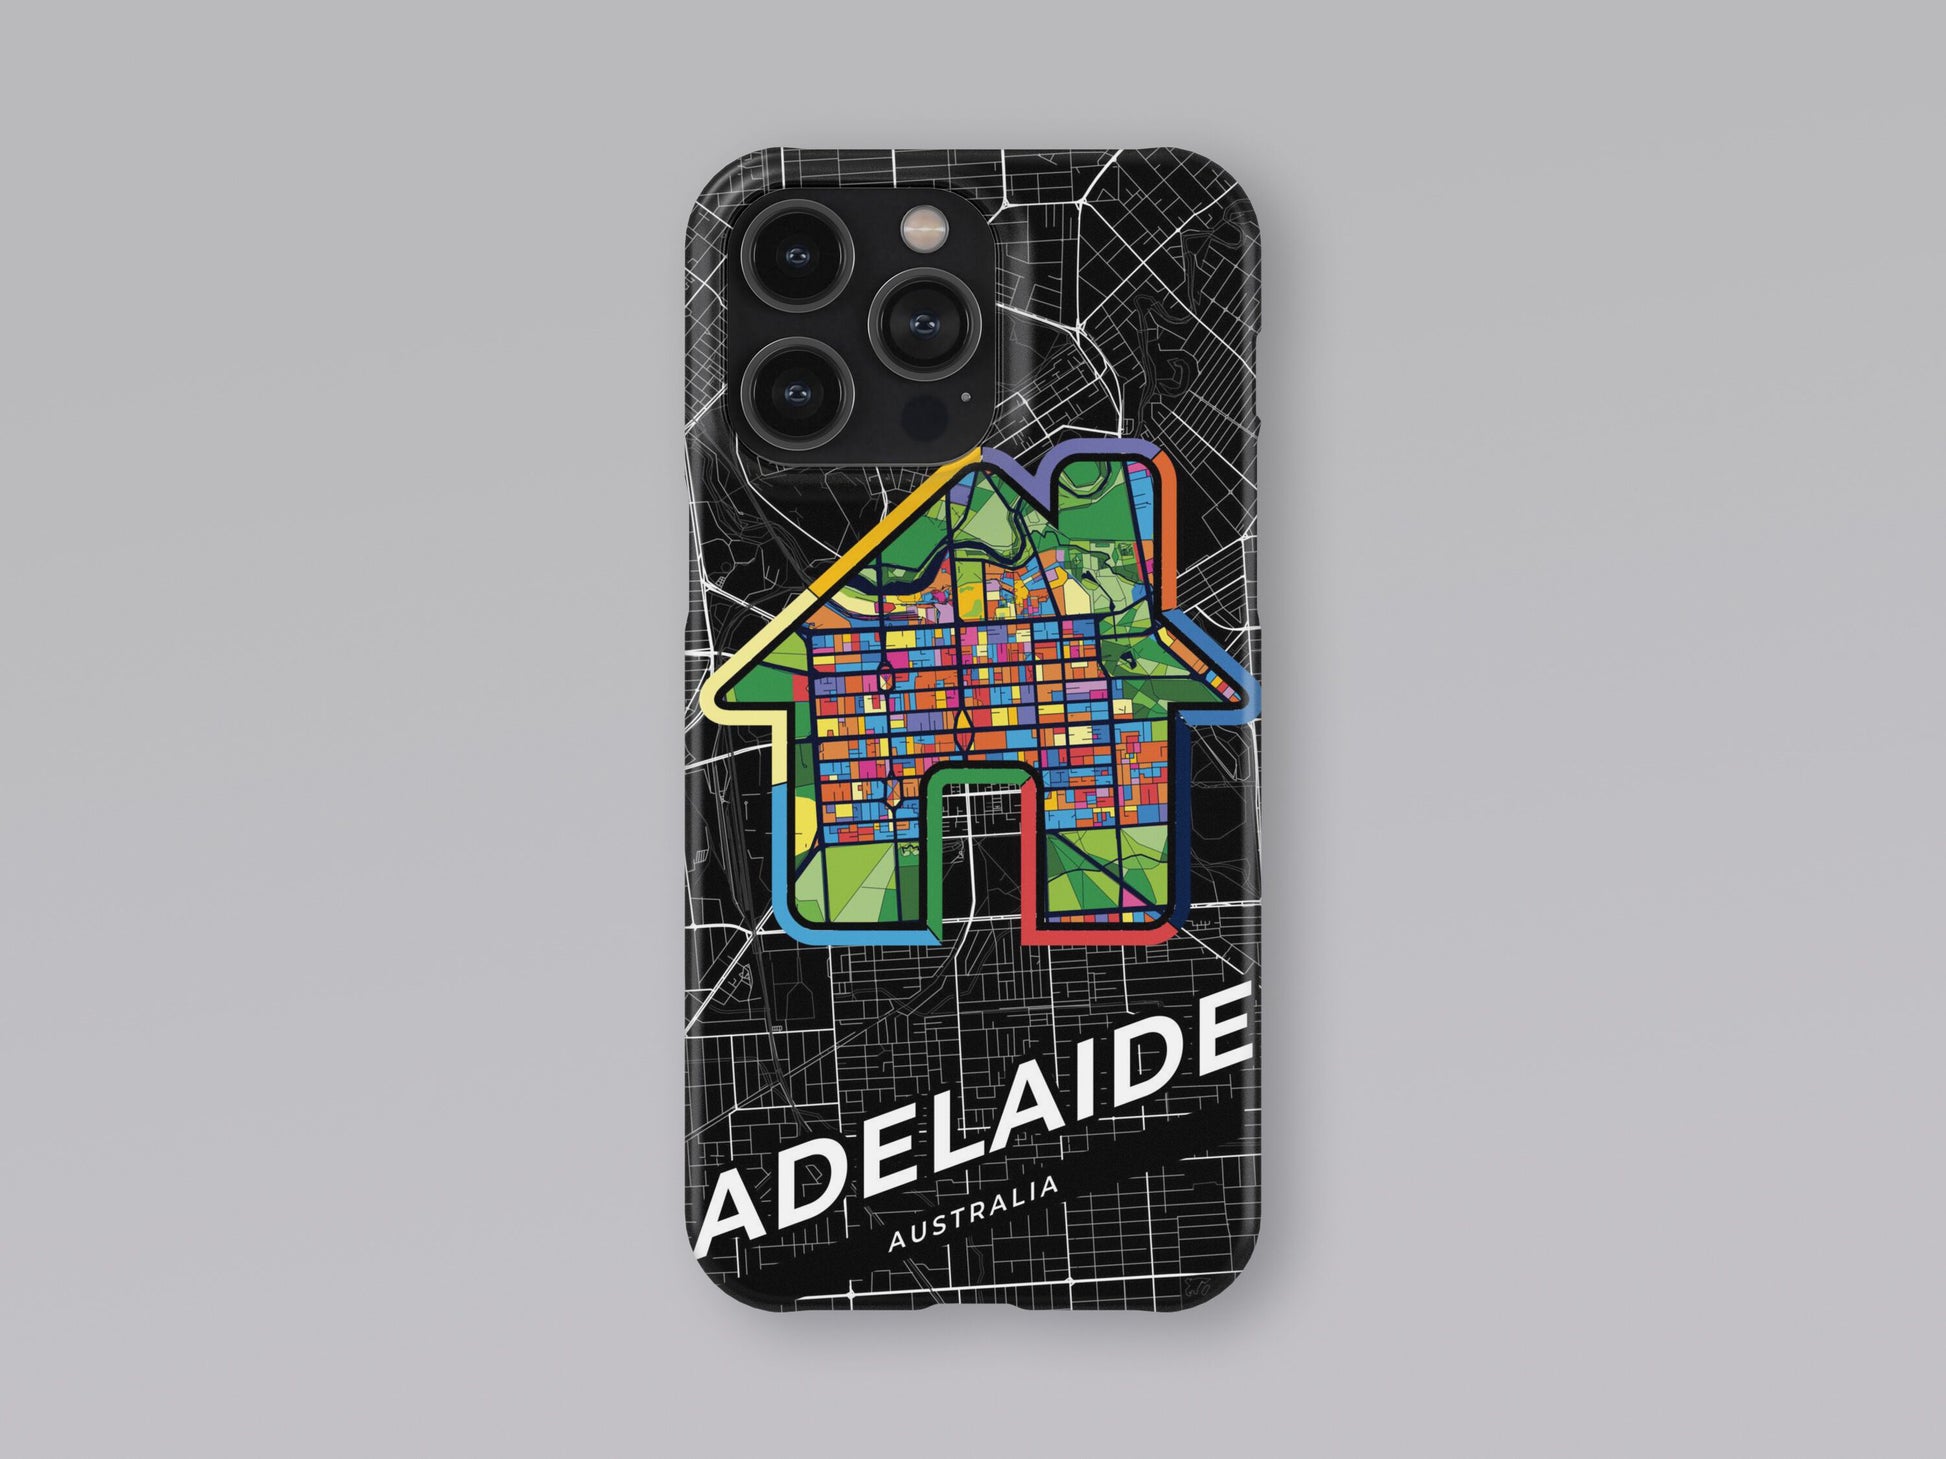 Adelaide Australia slim phone case with colorful icon. Birthday, wedding or housewarming gift. Couple match cases. 3